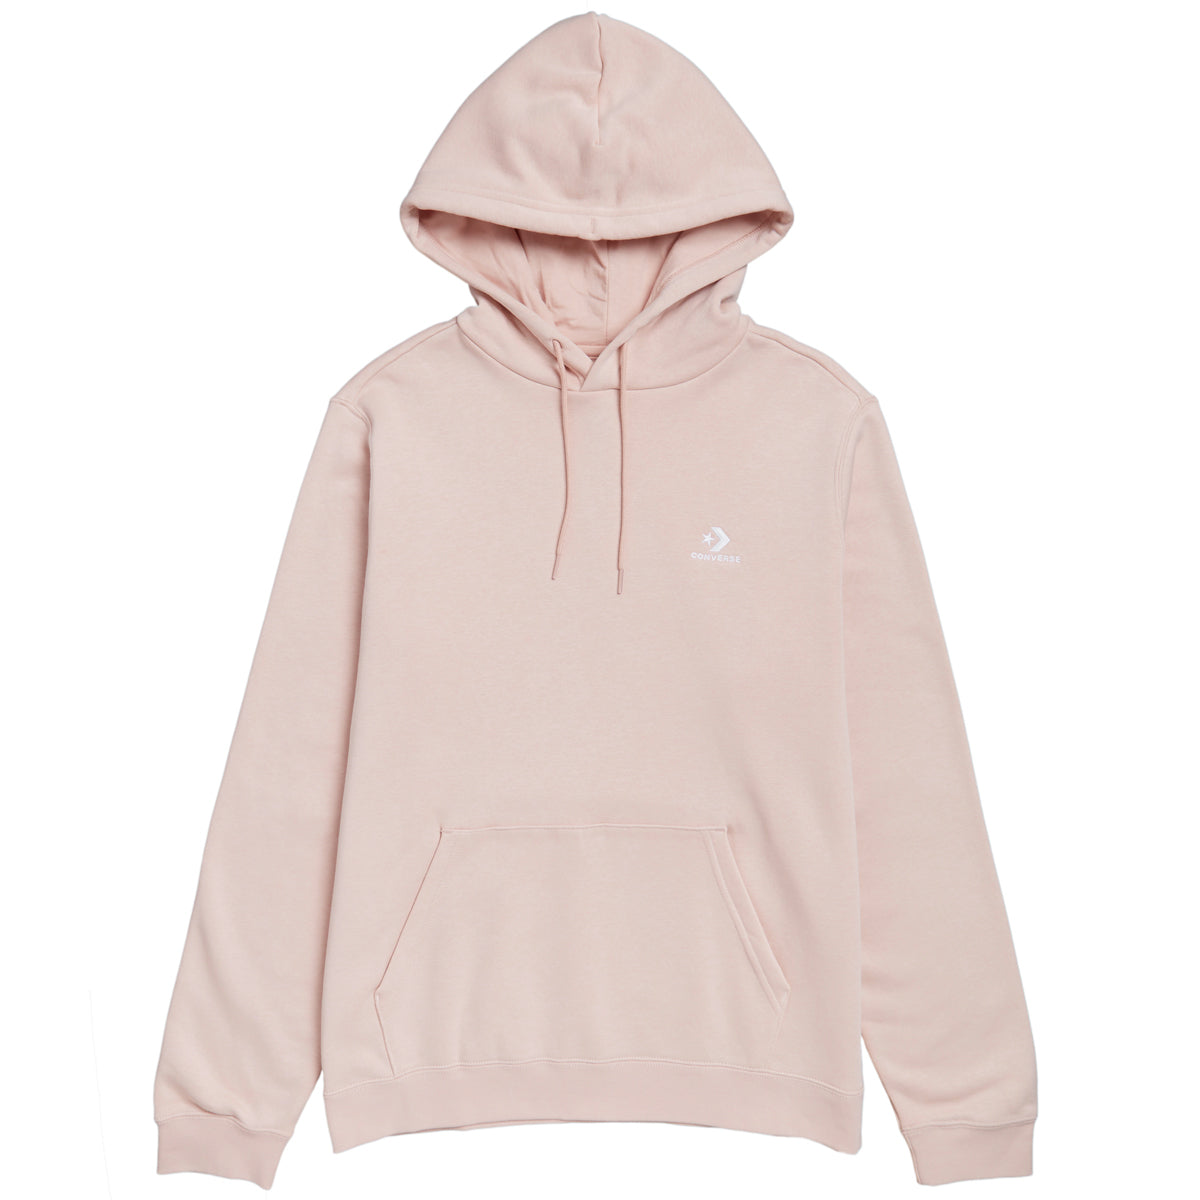 Converse Go-to Embroidered Star Chevron Hoodie - Pink Sage image 1